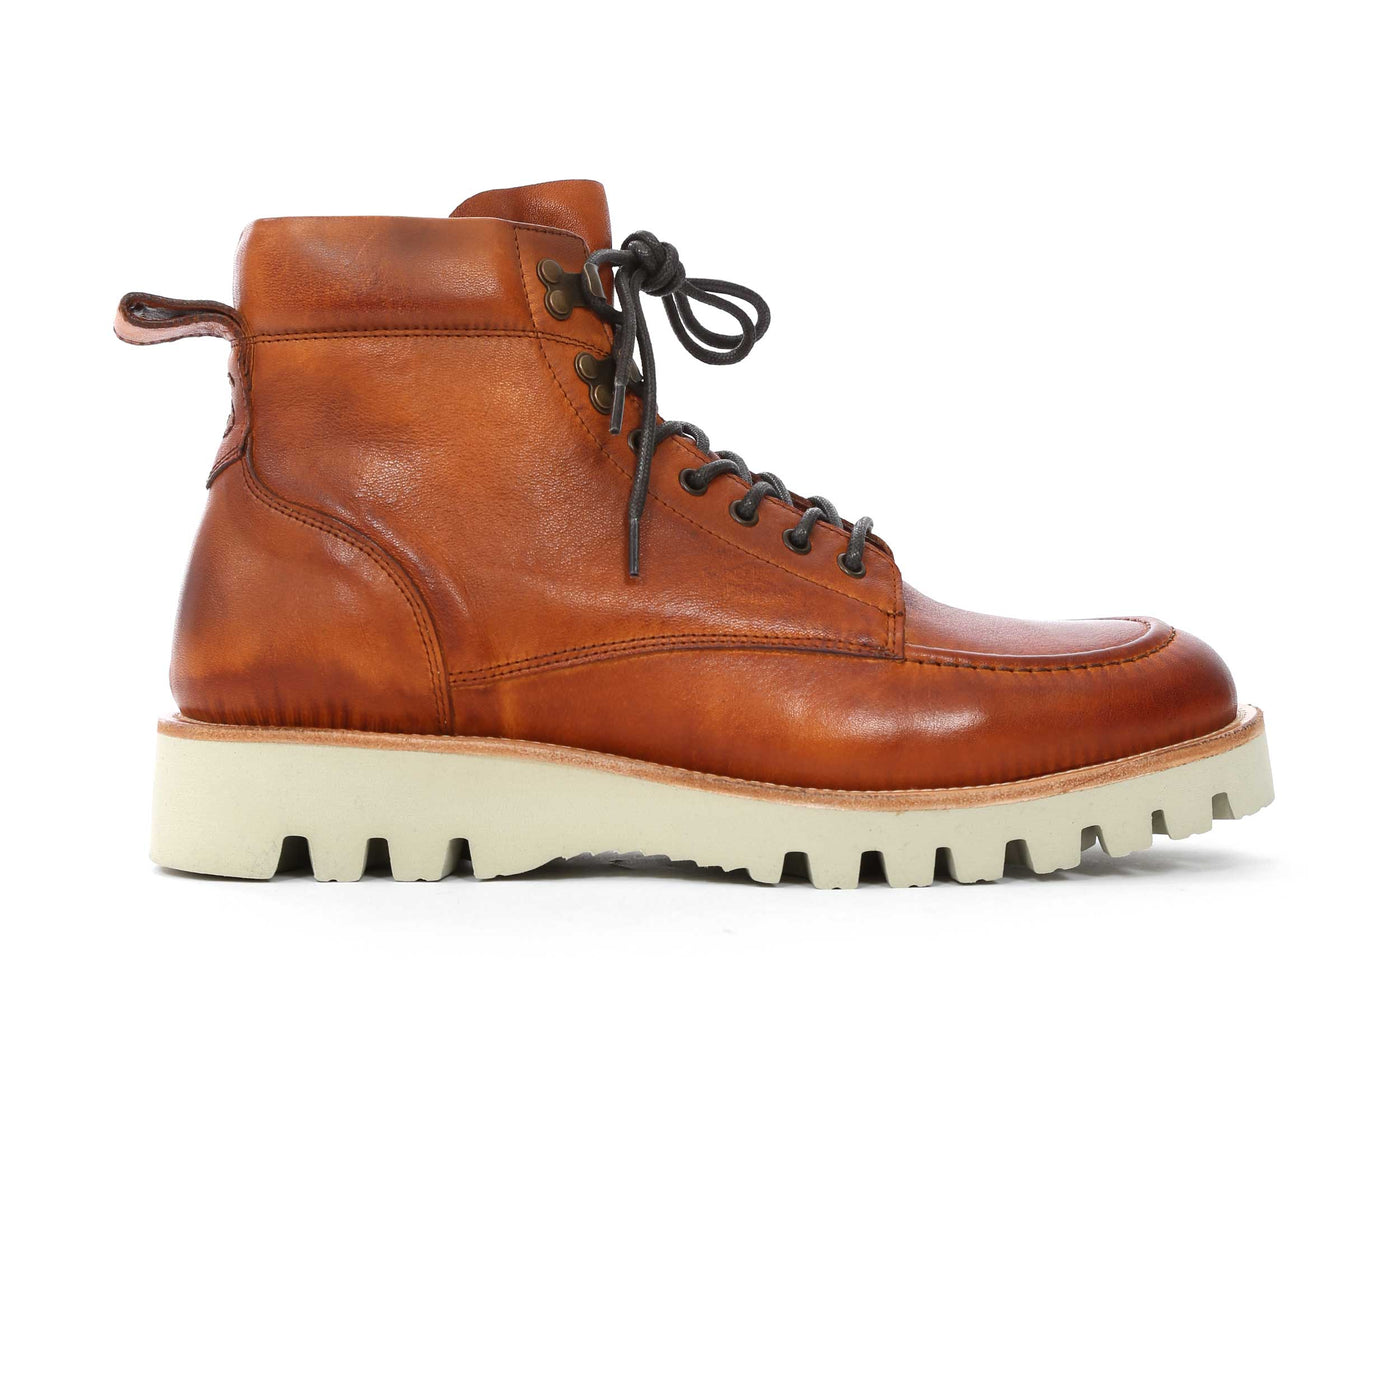 Oliver Sweeney Bolhas Boot in Tan